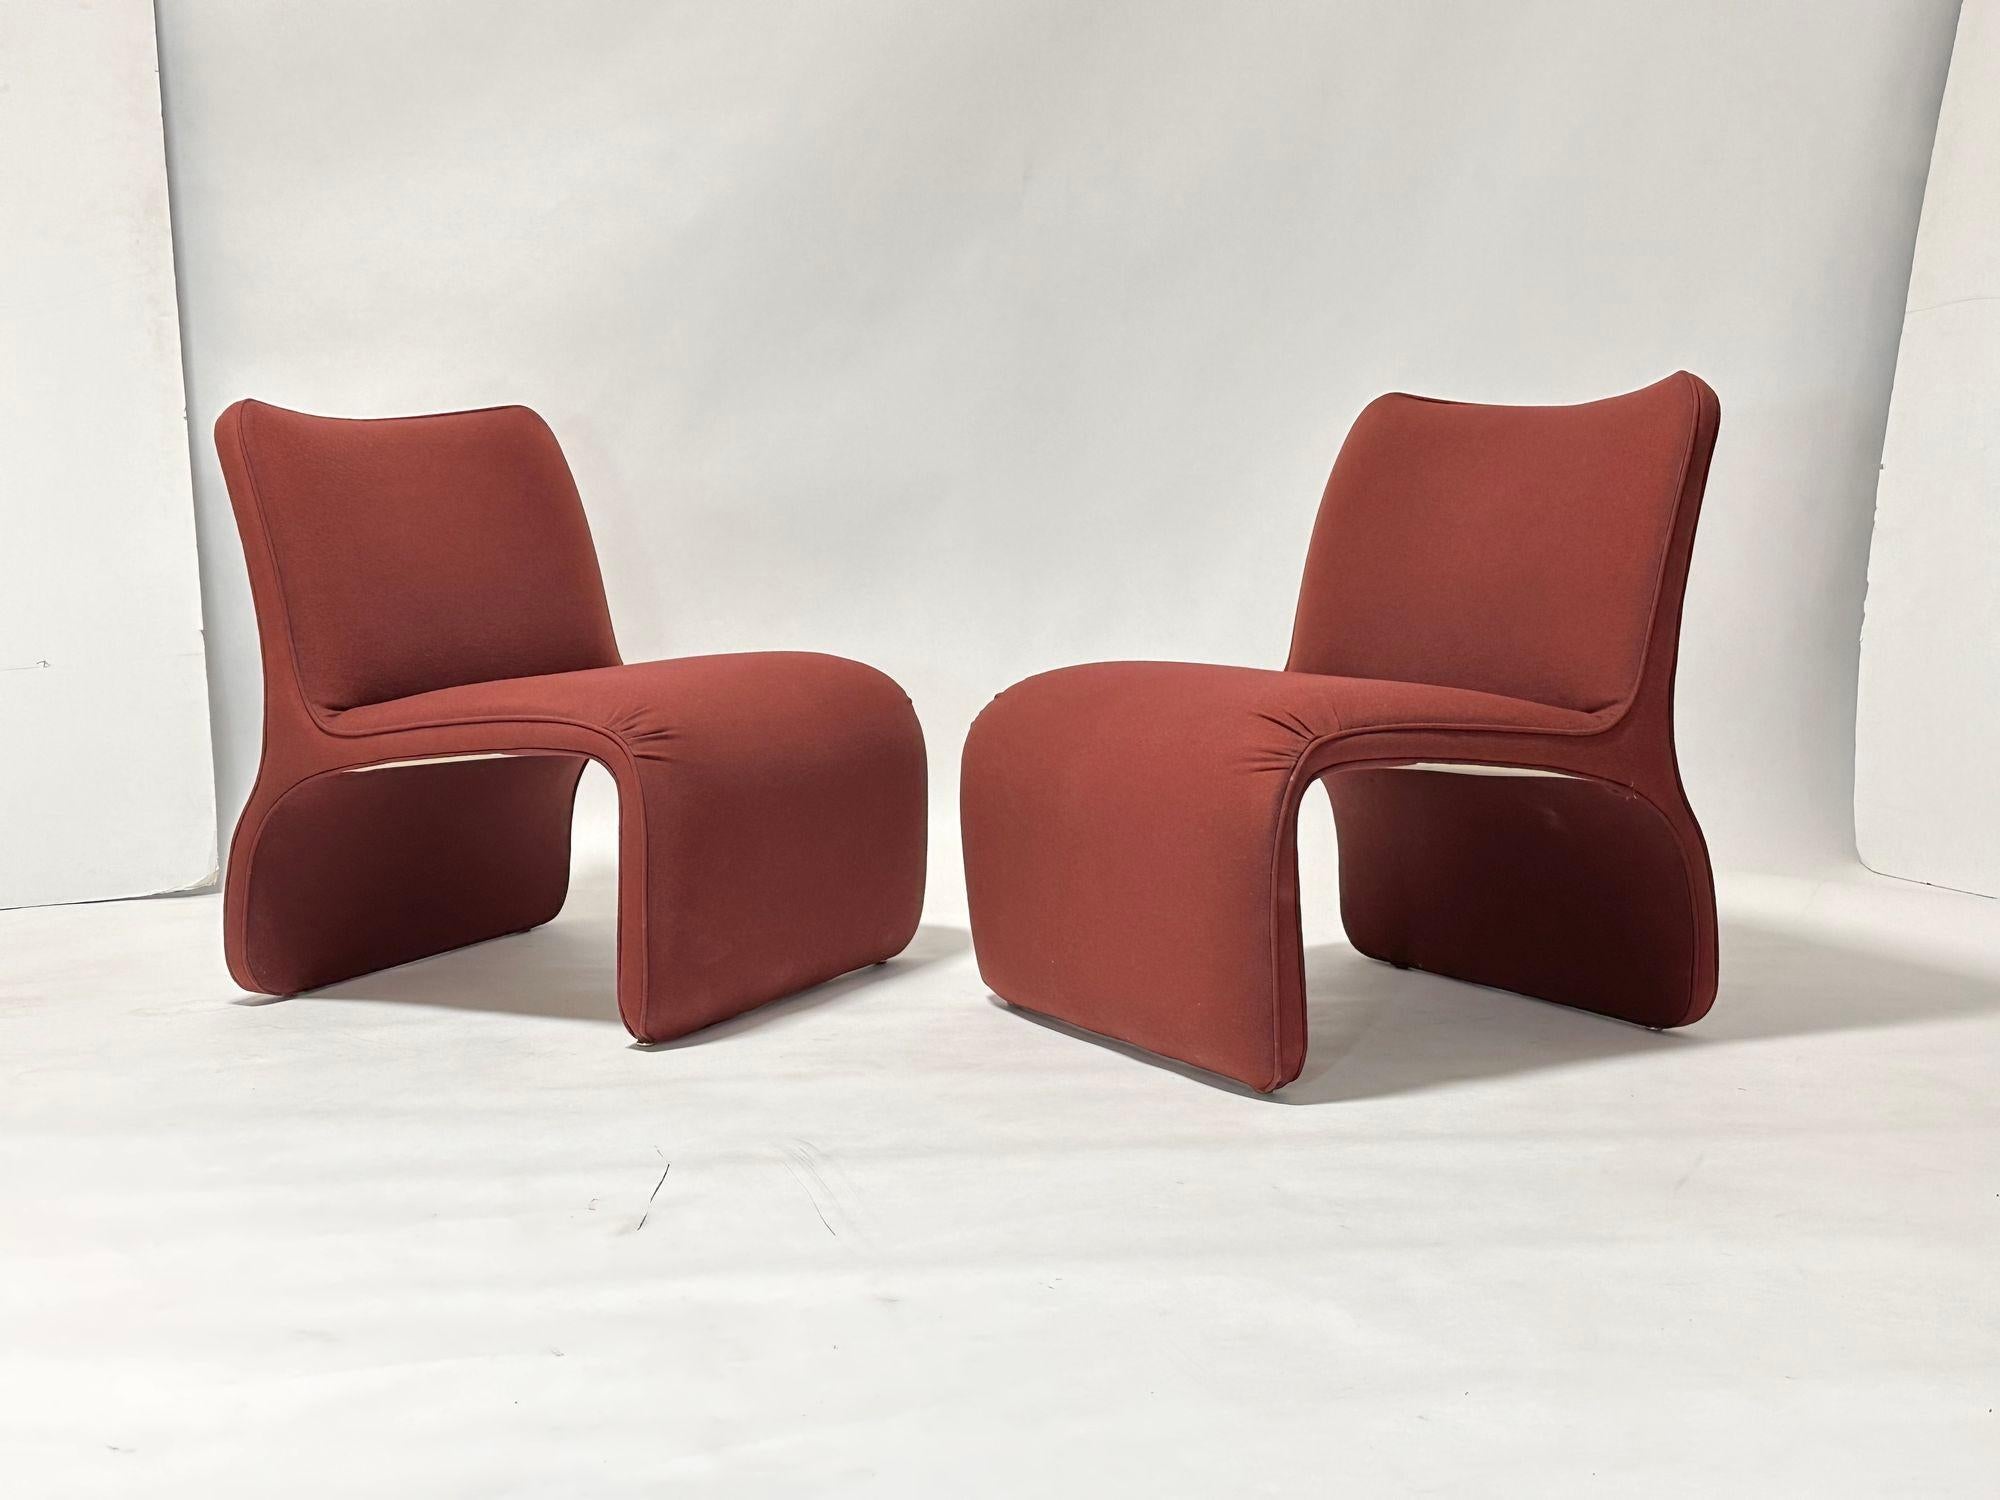 Pair sculptural slipper lounge chairs for Preview, 1990. Original upholstery.